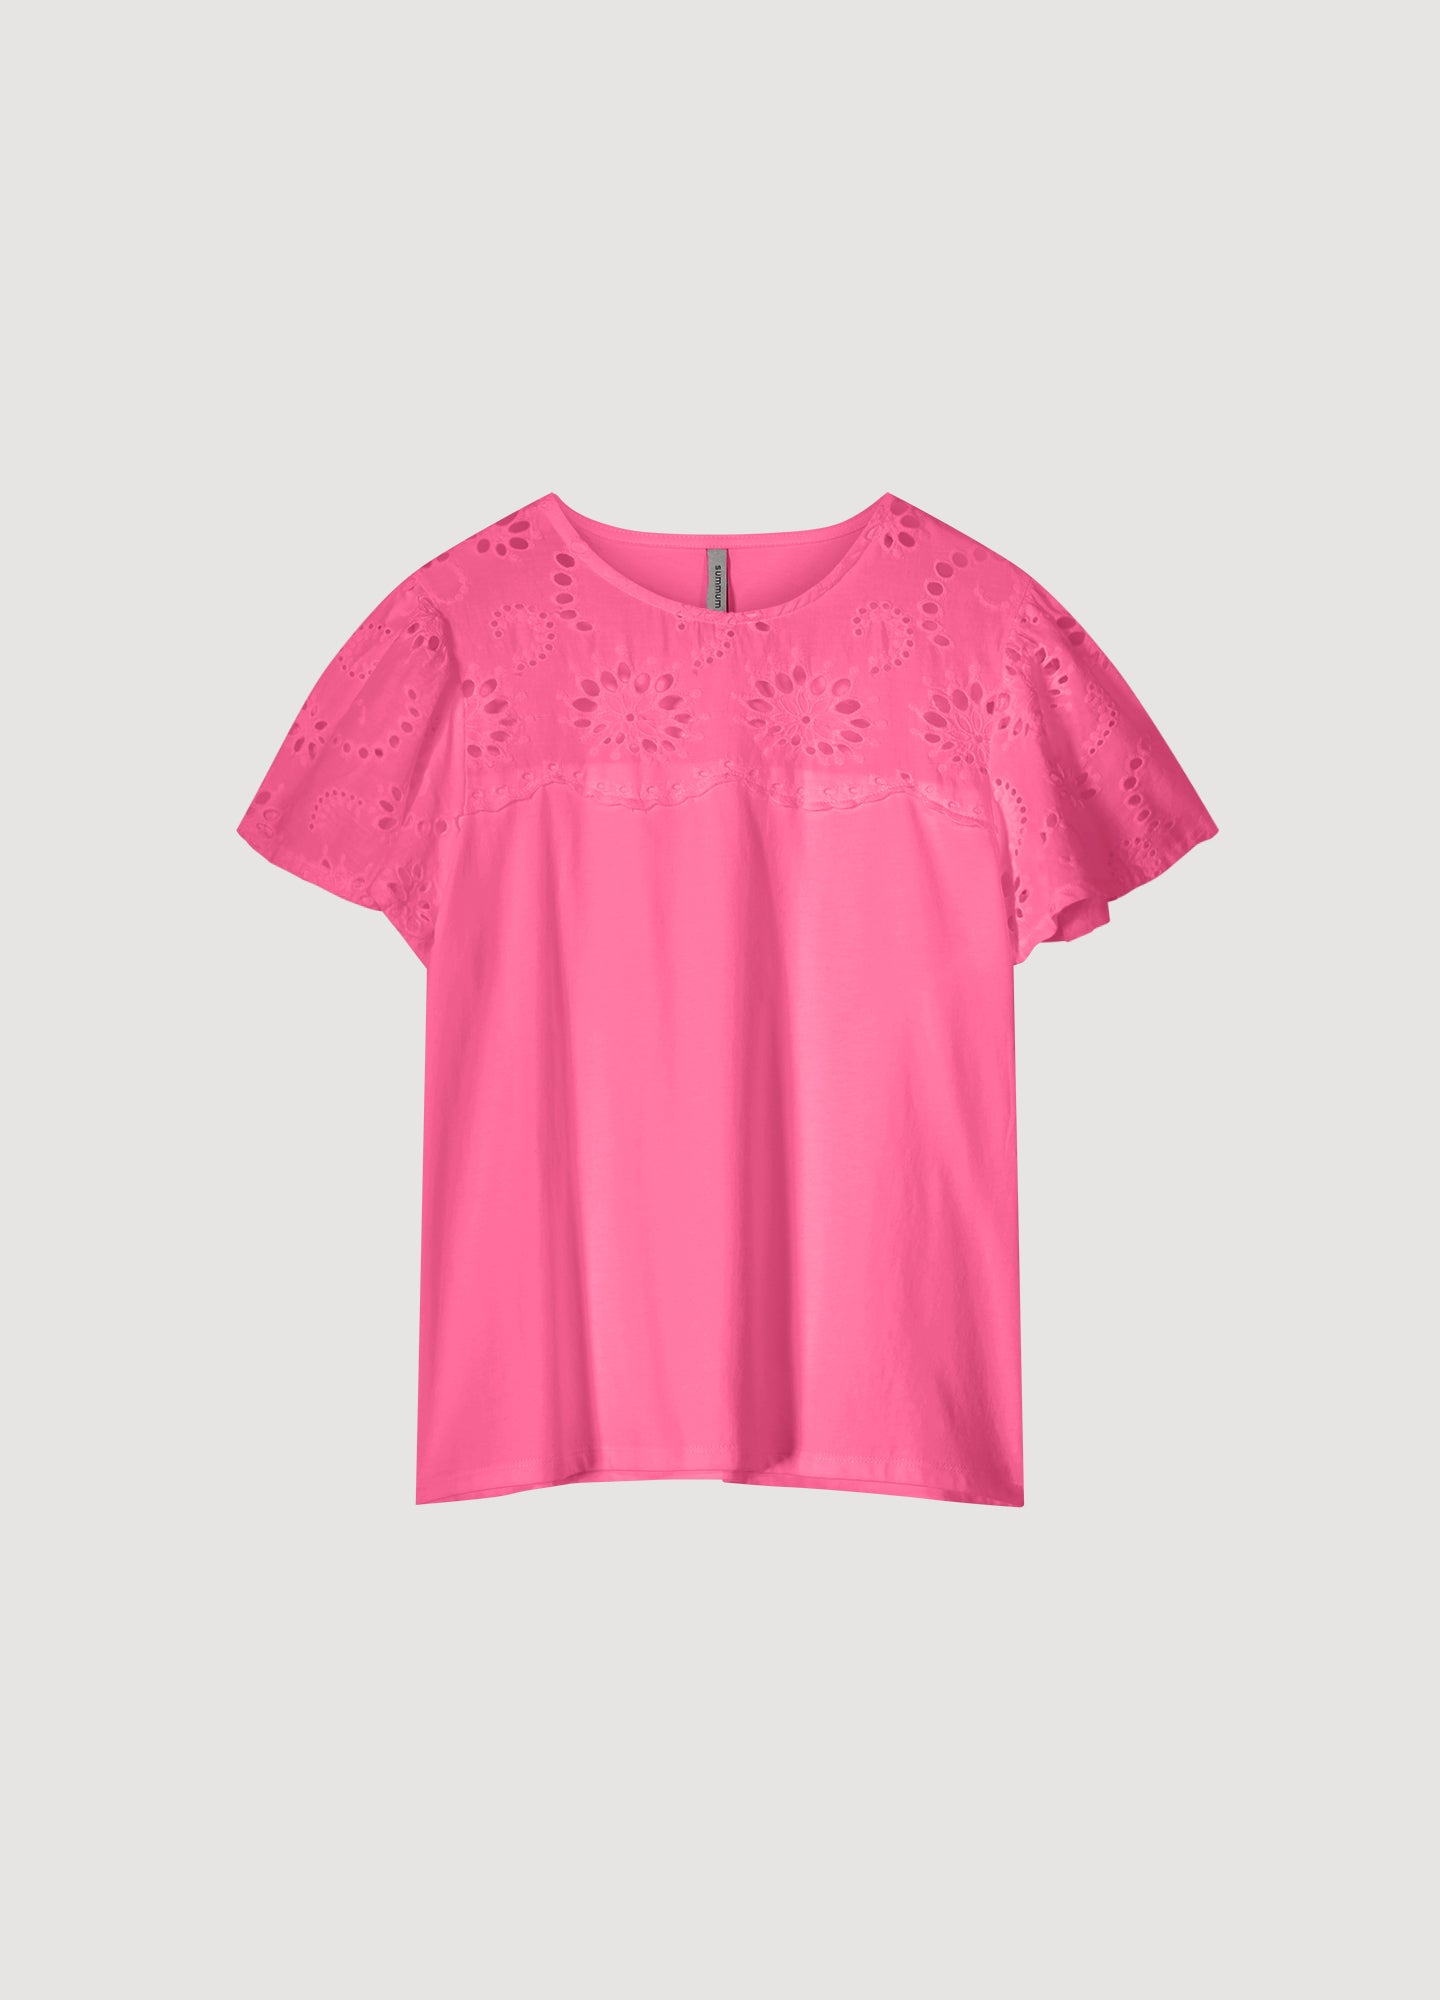 T-shirt broderie anglaise